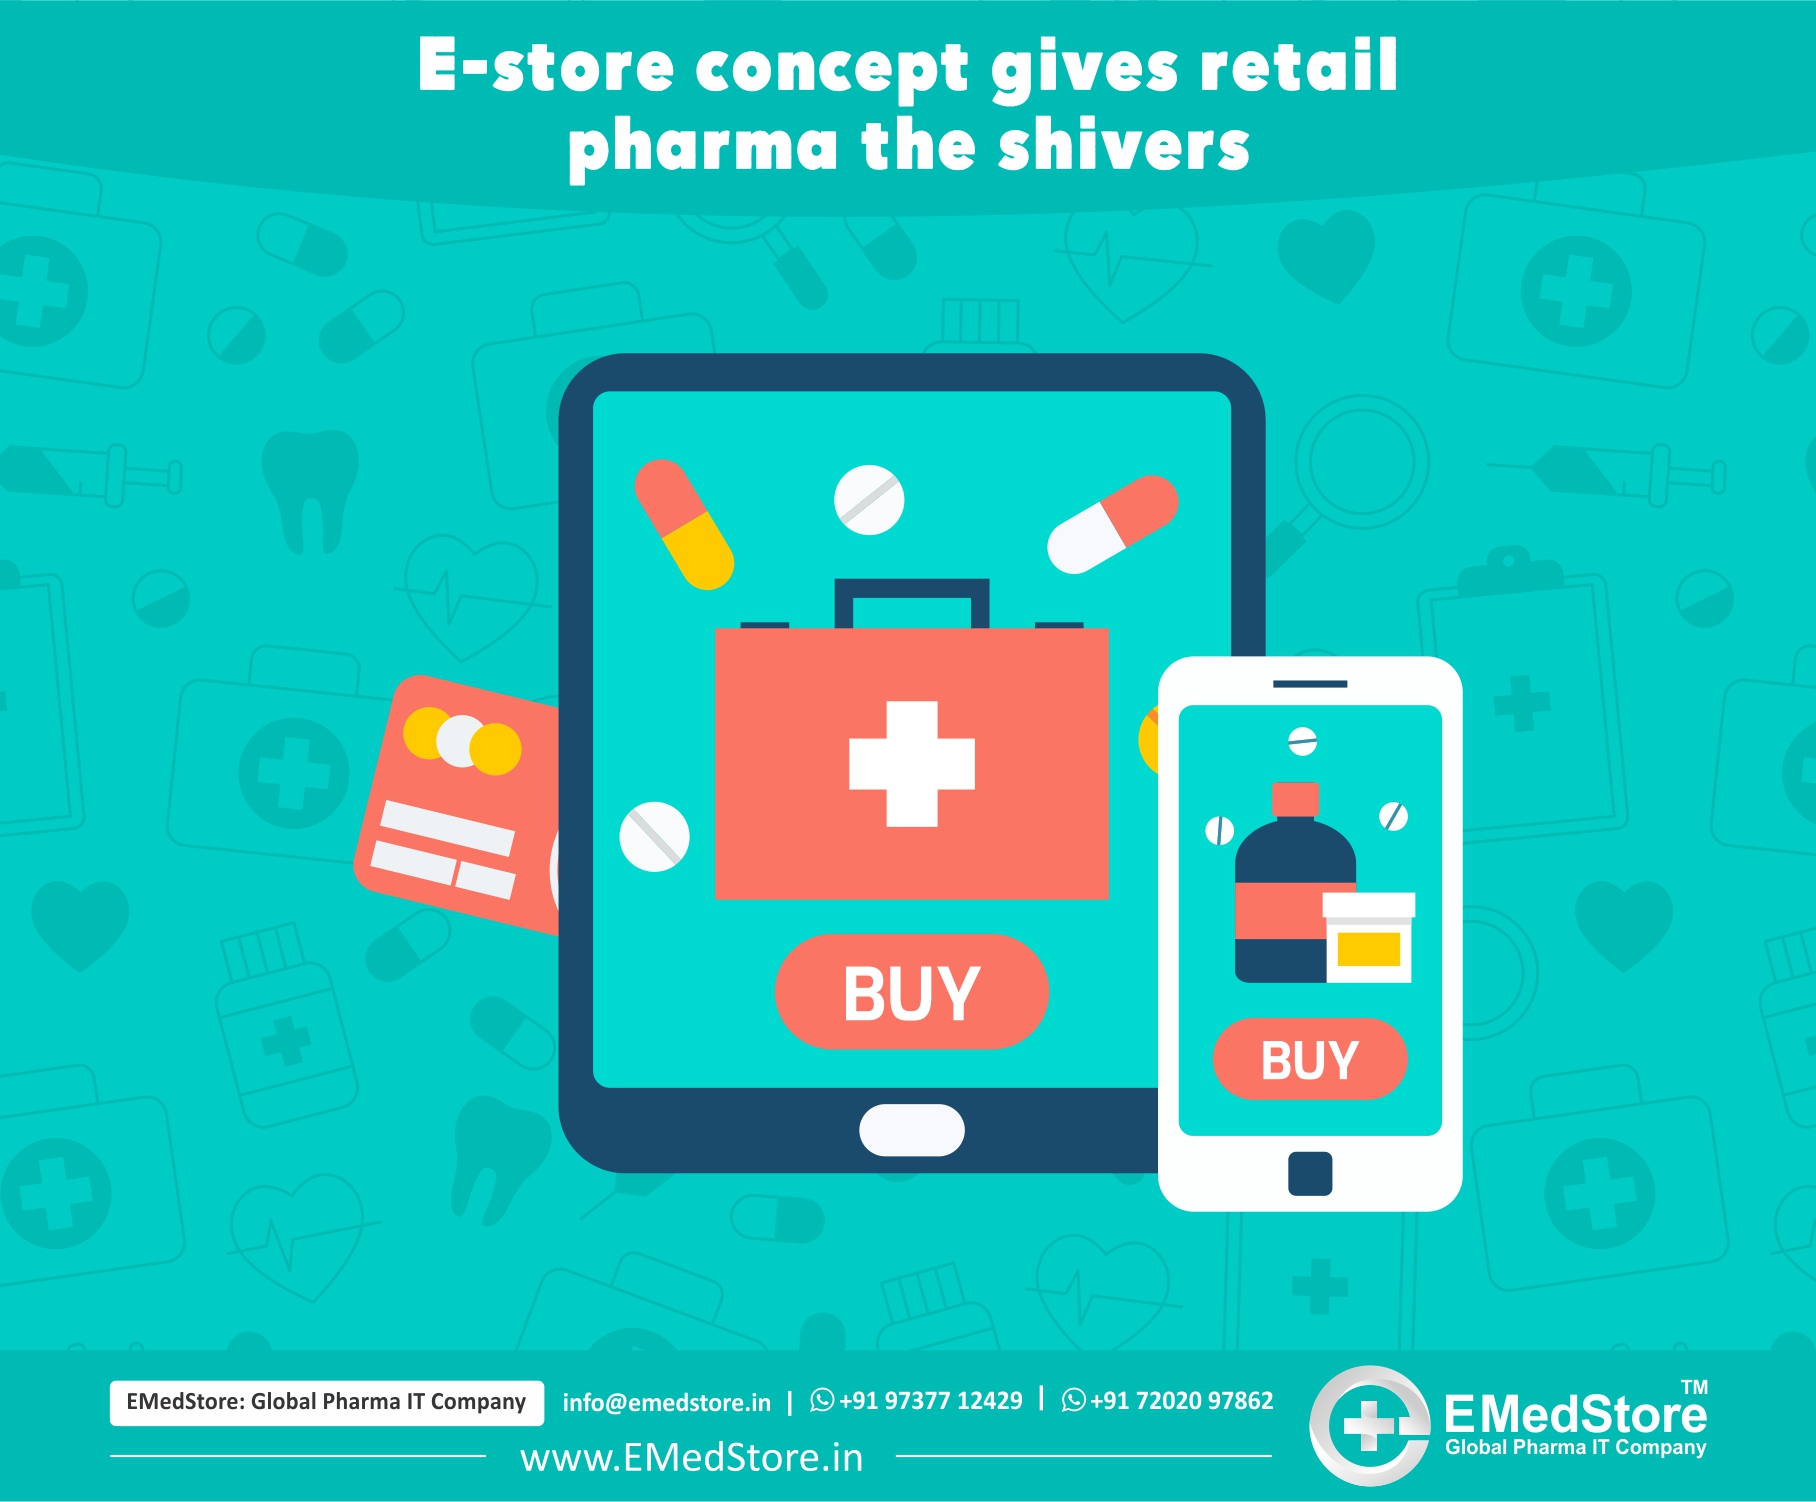 E-store concept gives retail pharma the shivers